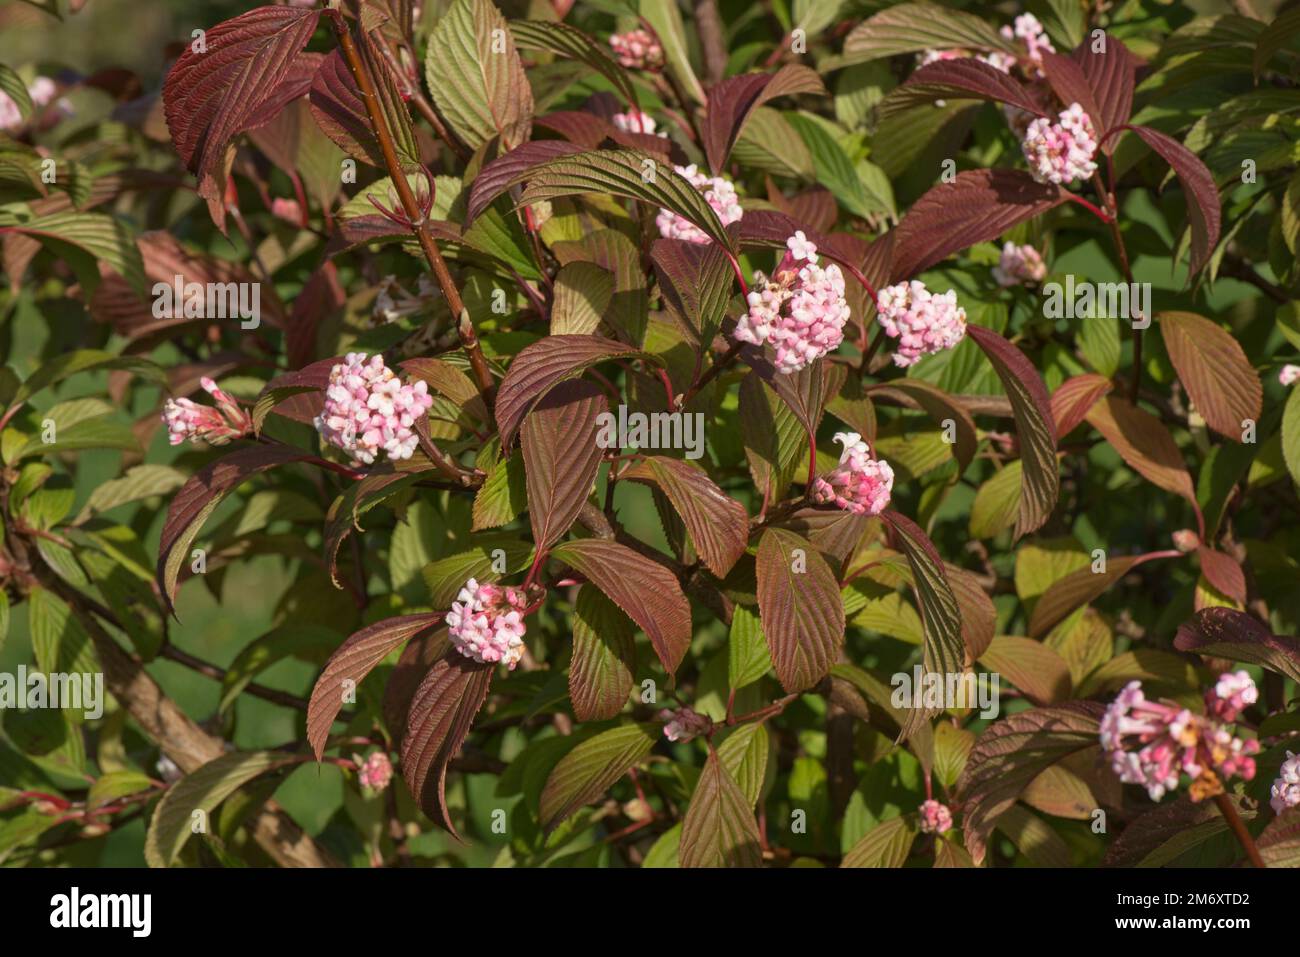 Viburnum X bodnantense 'Dawn' with fragrant pink clusters of flowers and green leaves turning red in autumn, Berkshire, October Stock Photo